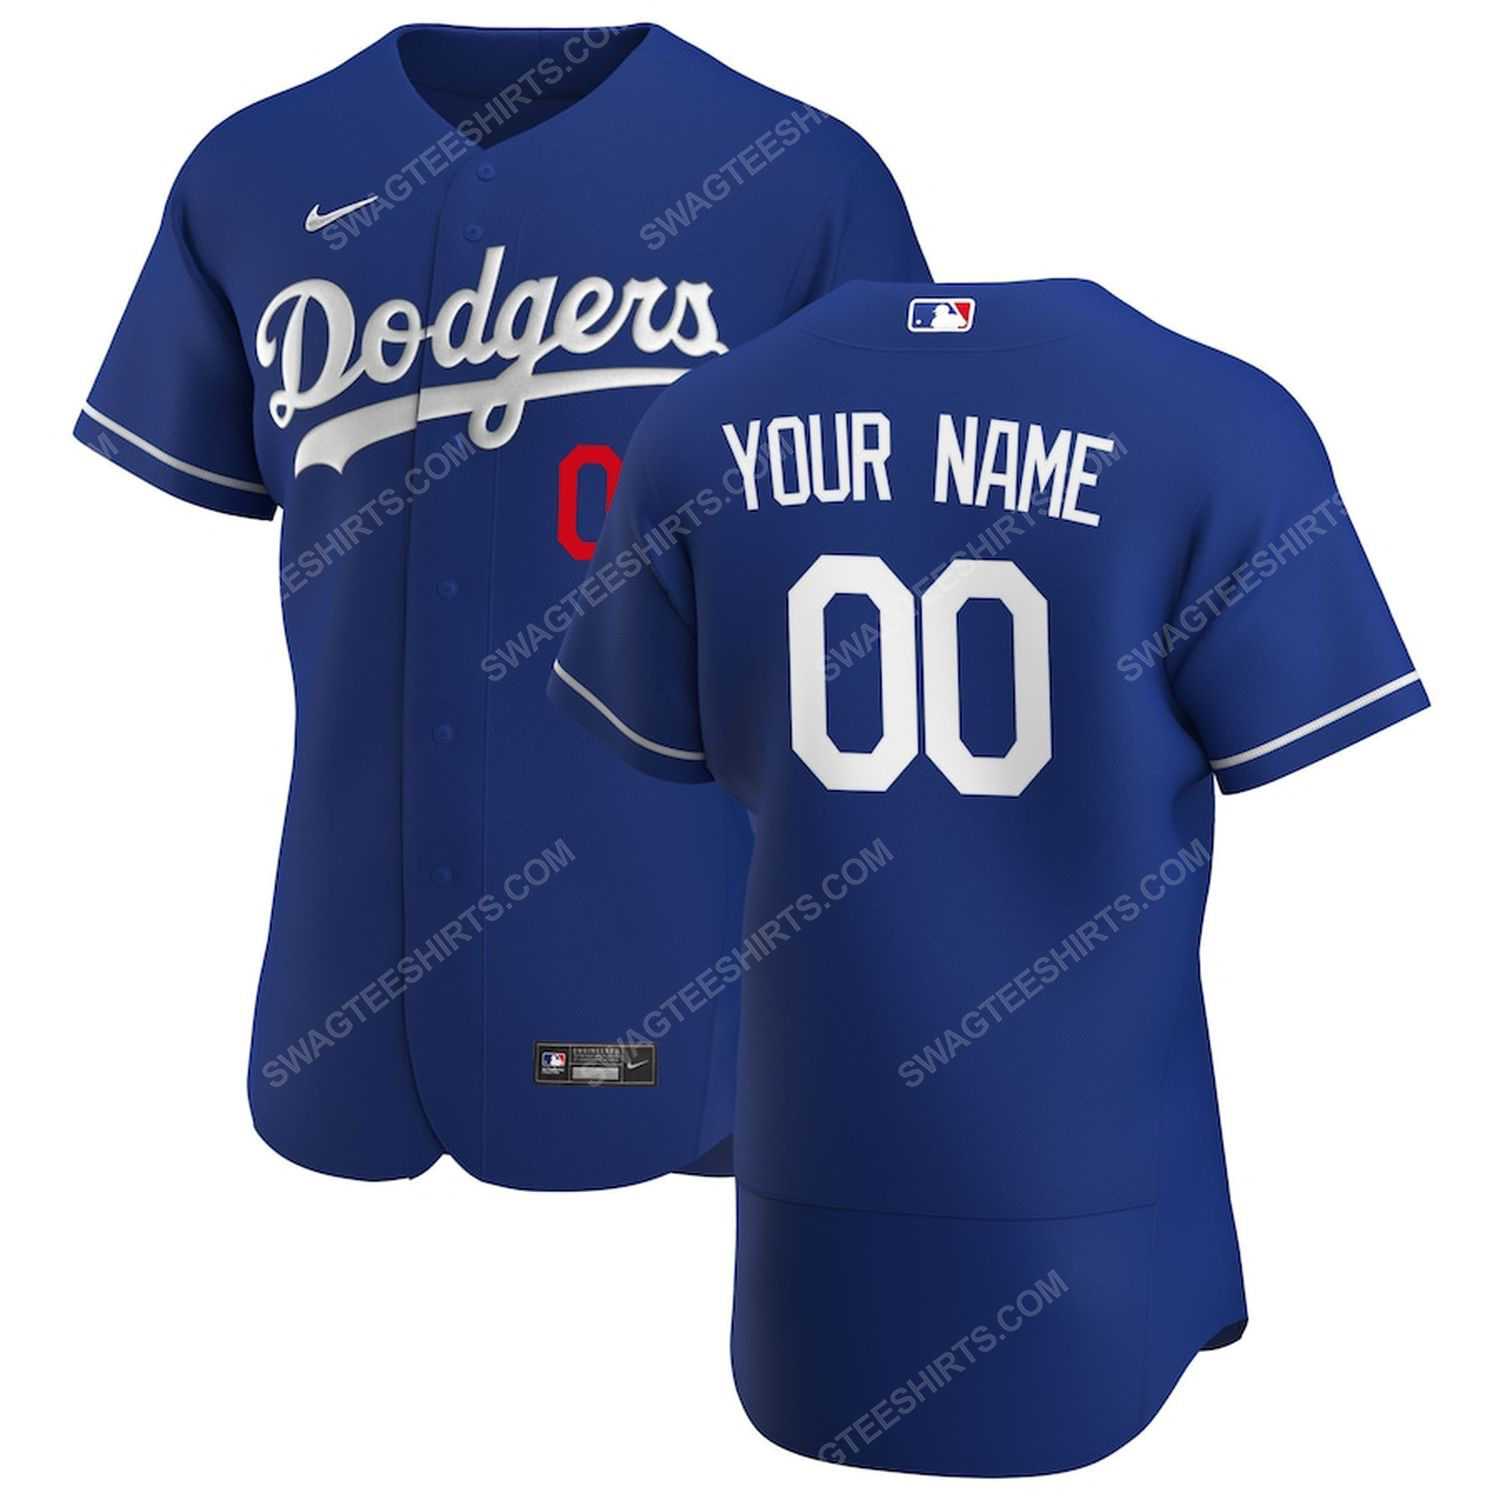 [special edition] Personalized major league baseball los angeles dodgers baseball jersey – maria